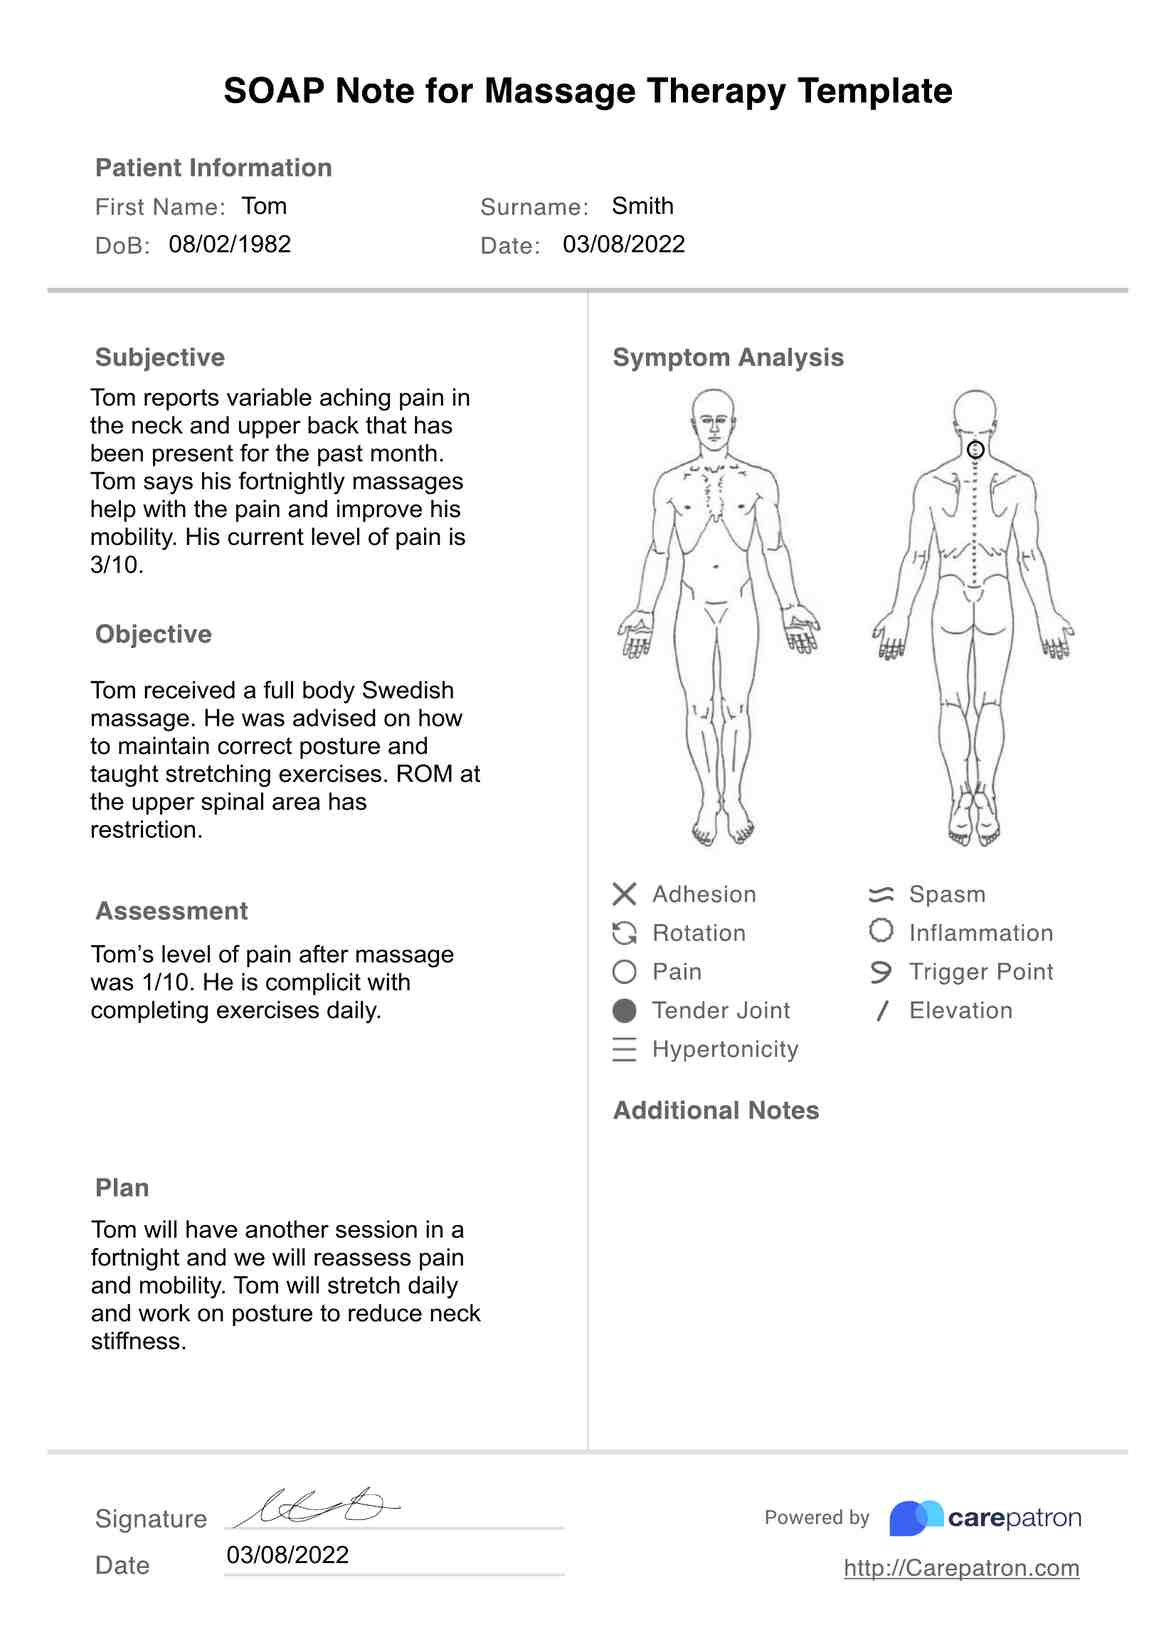 SOAP Notes for Massage Therapy Template PDF Example